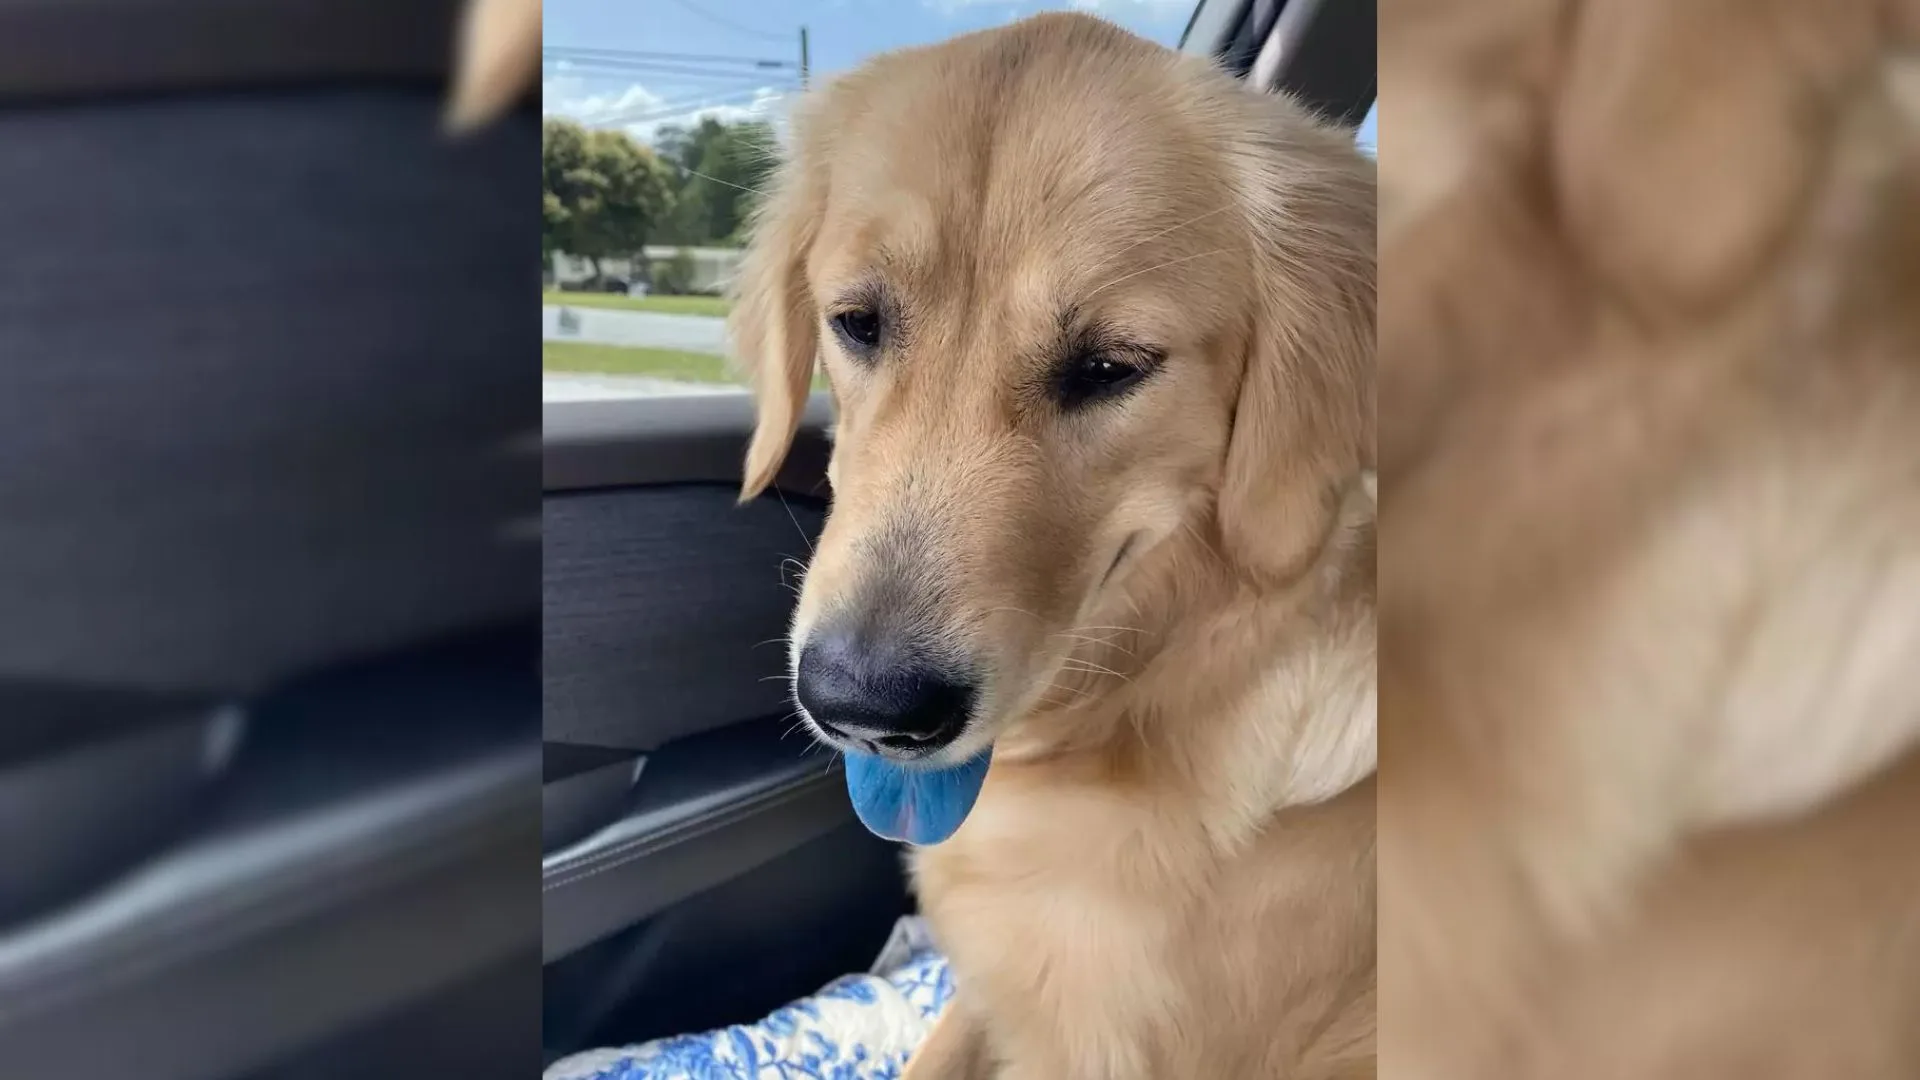 Woman Went To The Store Quickly Only To Return And See That Her Dog’s Tongue Is Suddenly Blue